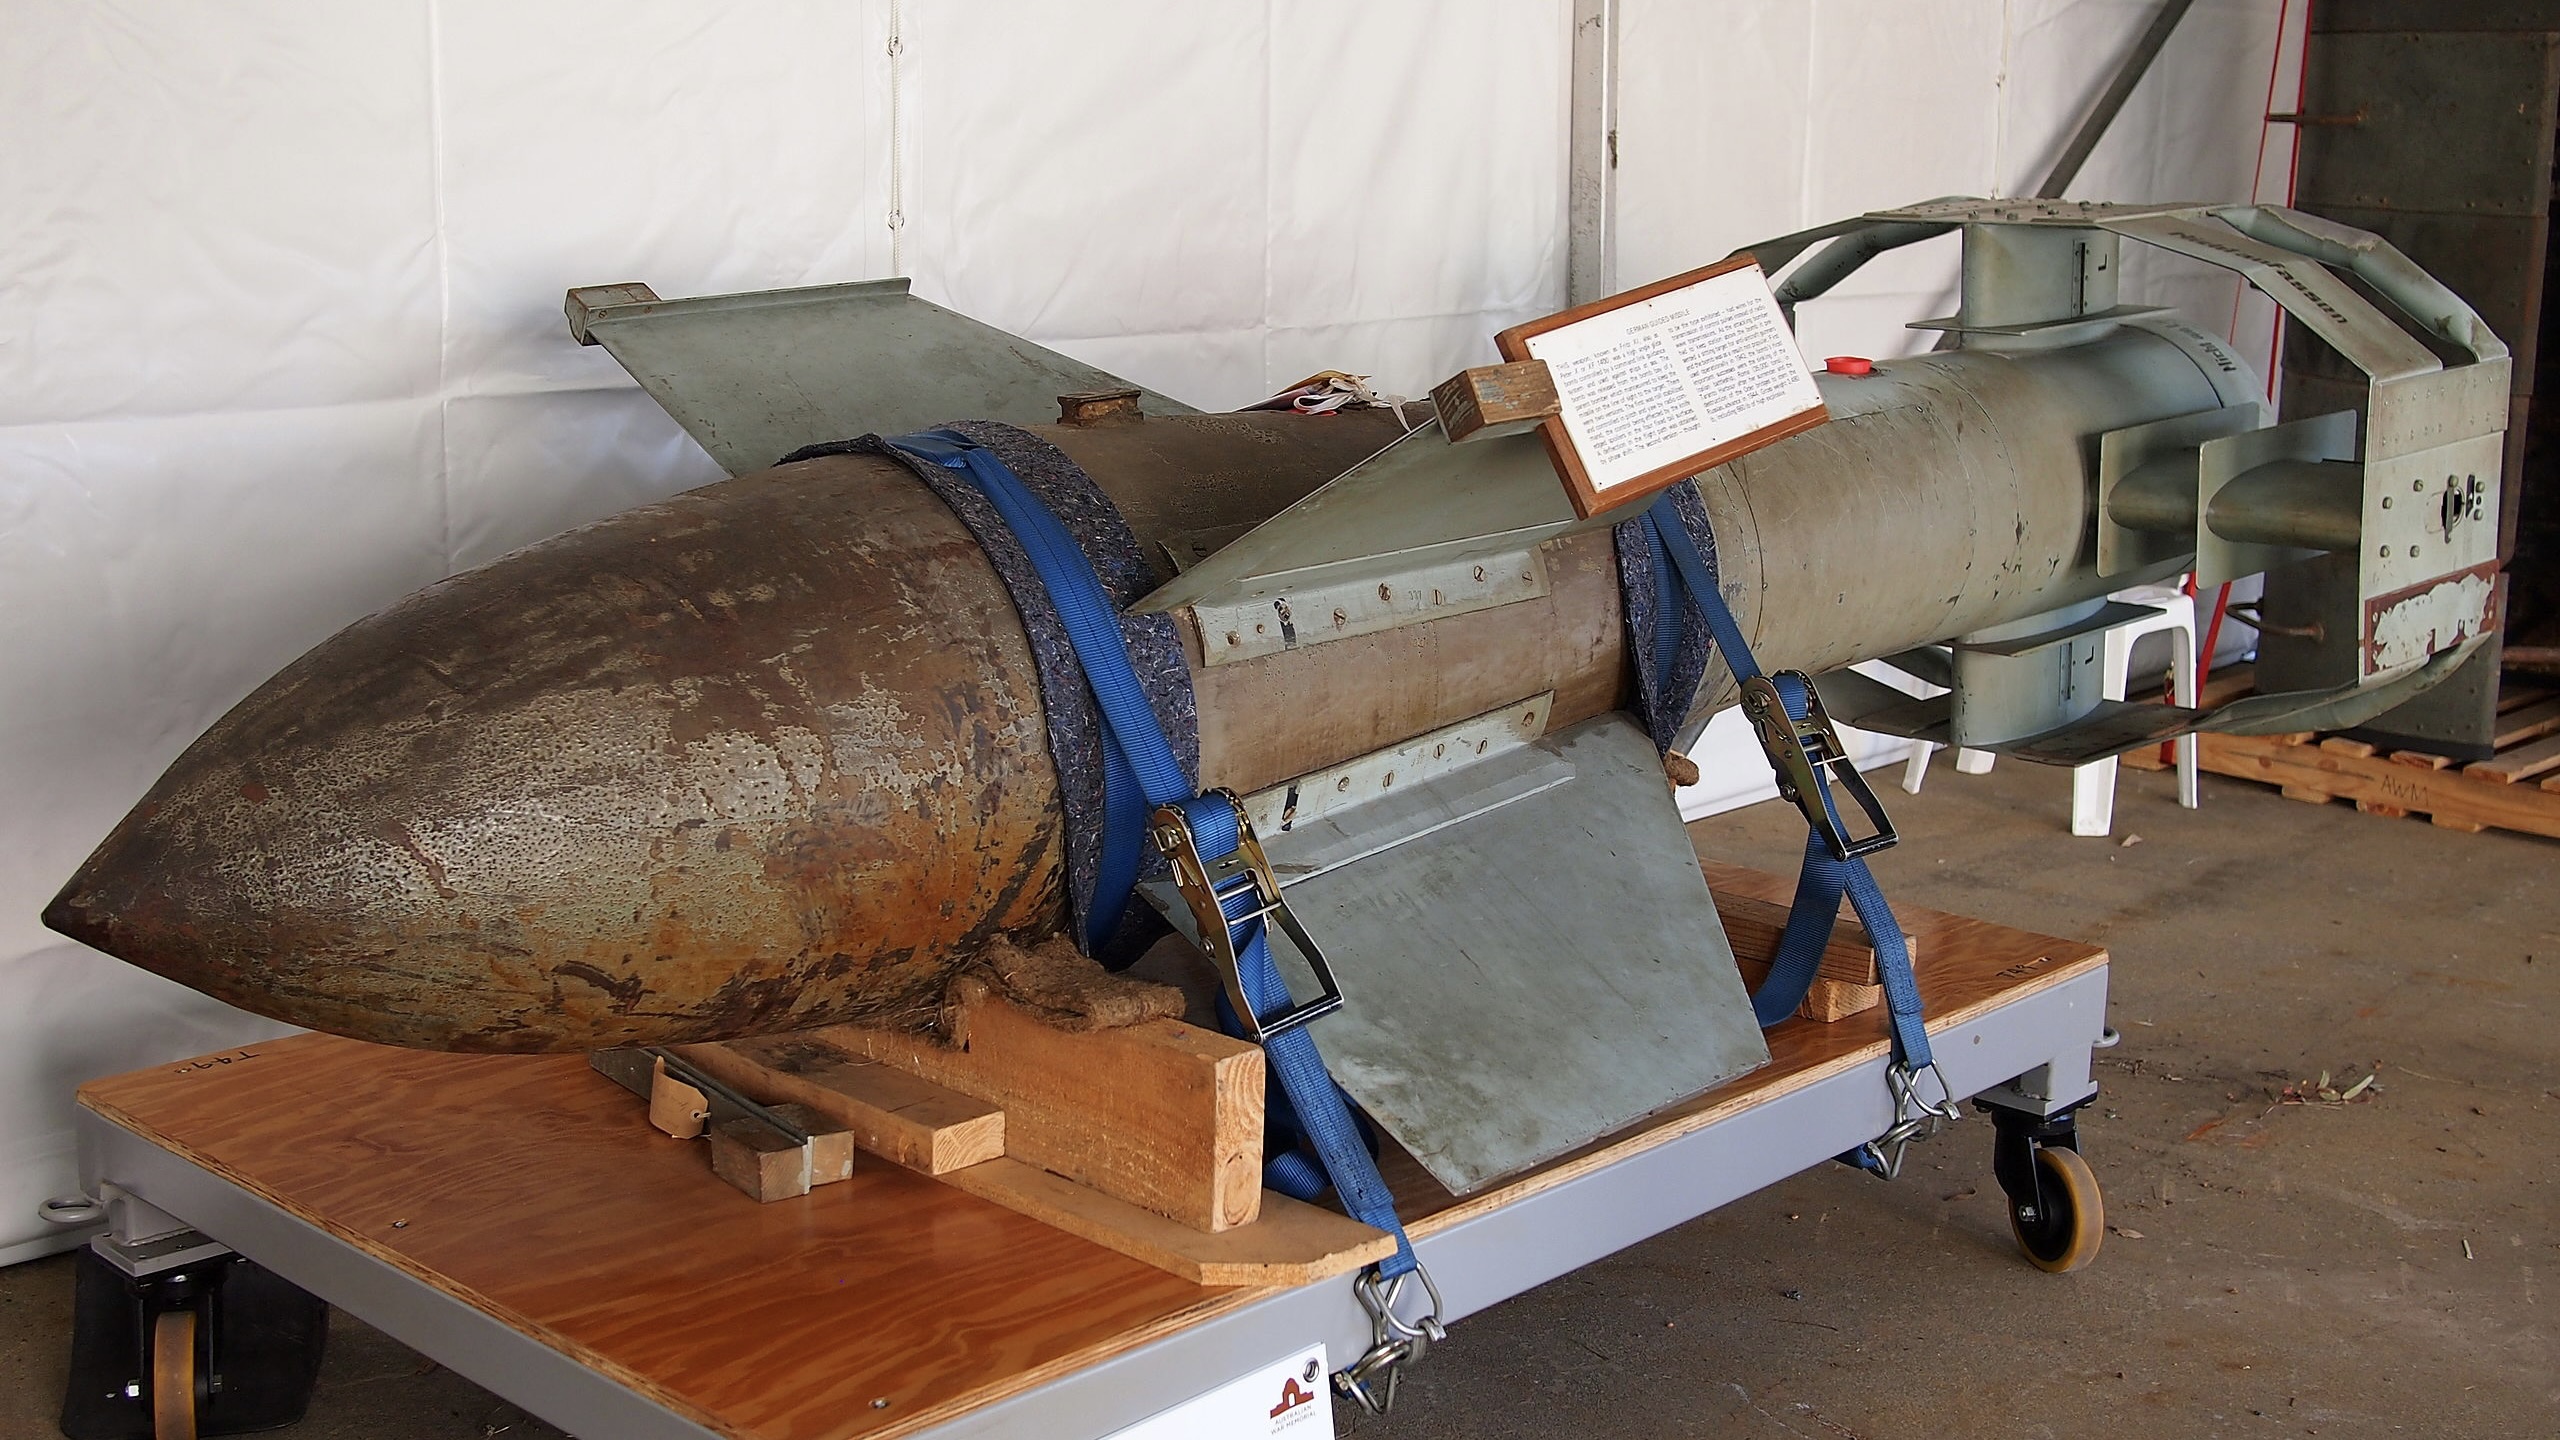 Fritz X guided bomb on display at the Australian War Memorial's Treloar Technology Centre